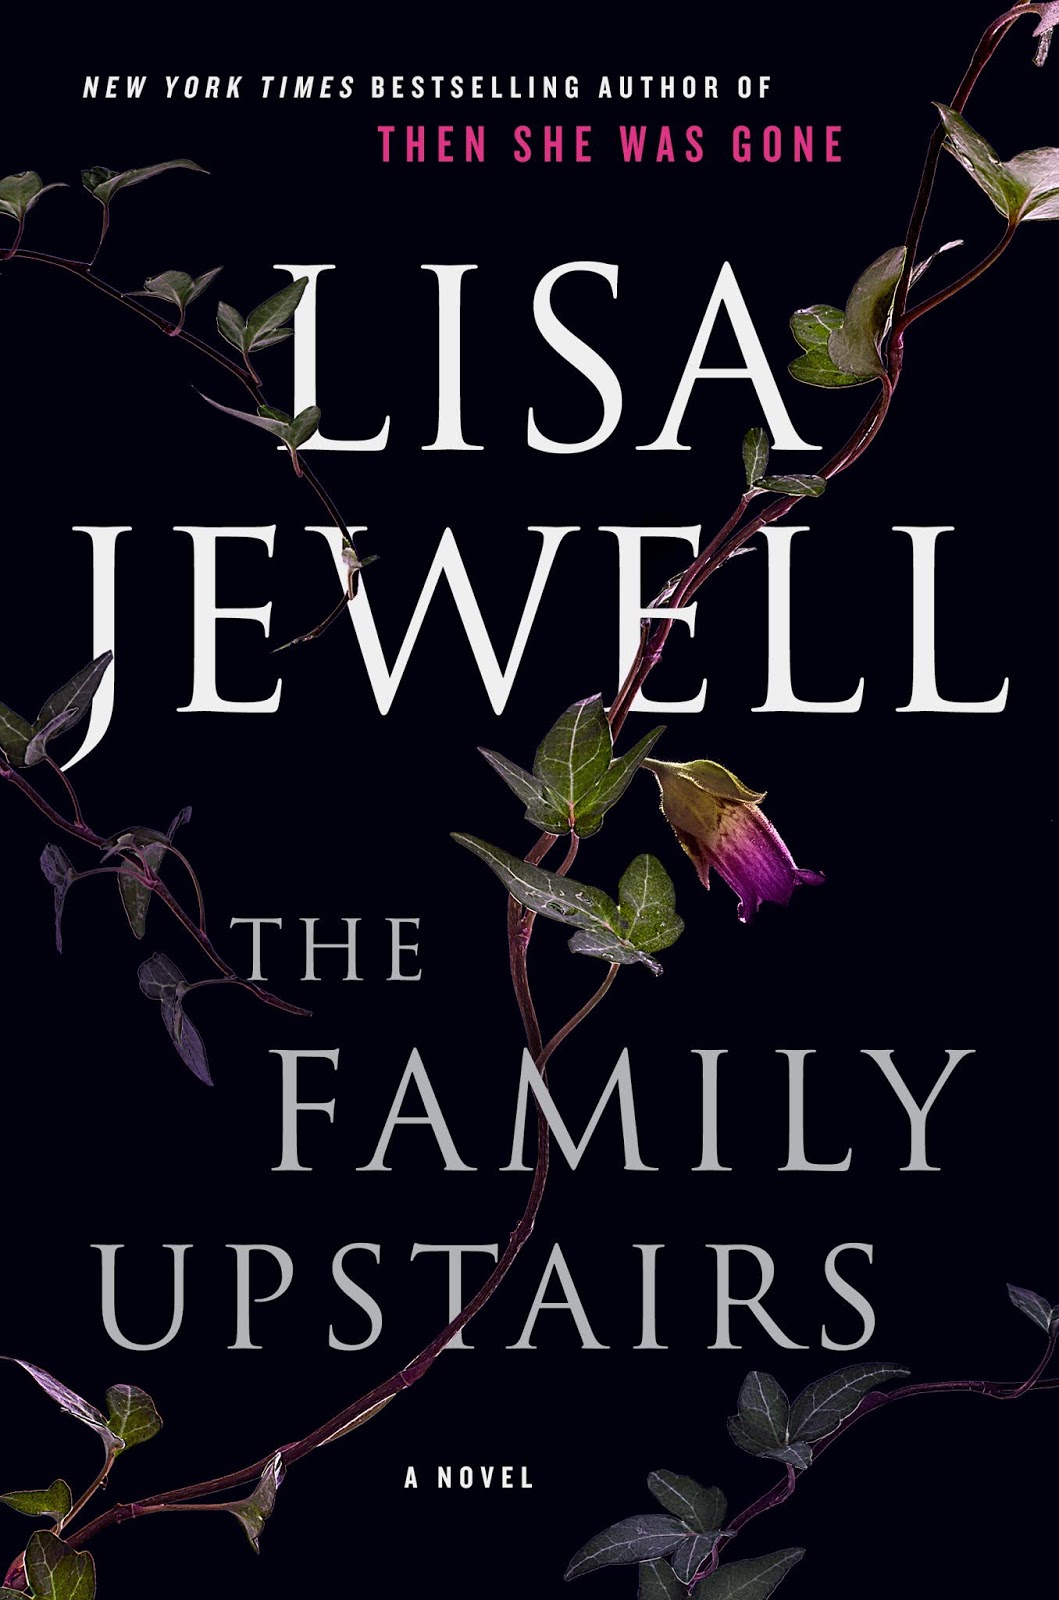 the family upstairs book review